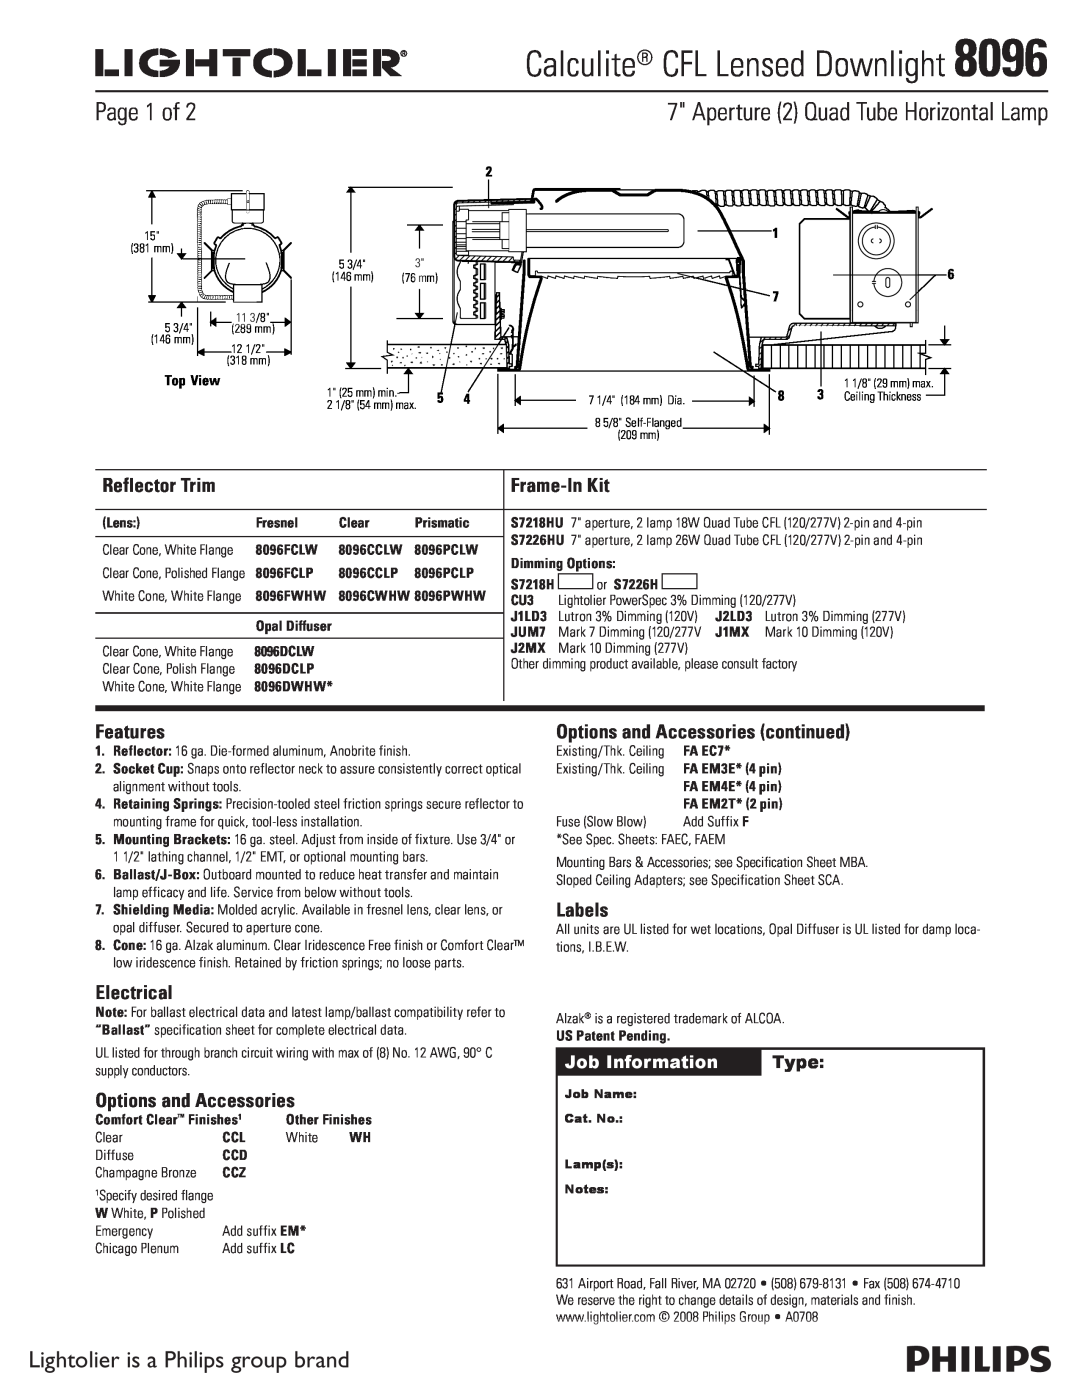 Lightolier 8096 specifications Page 1 of, Lightolier is a Philips group brand, Job Information, Type, Reflector Trim 